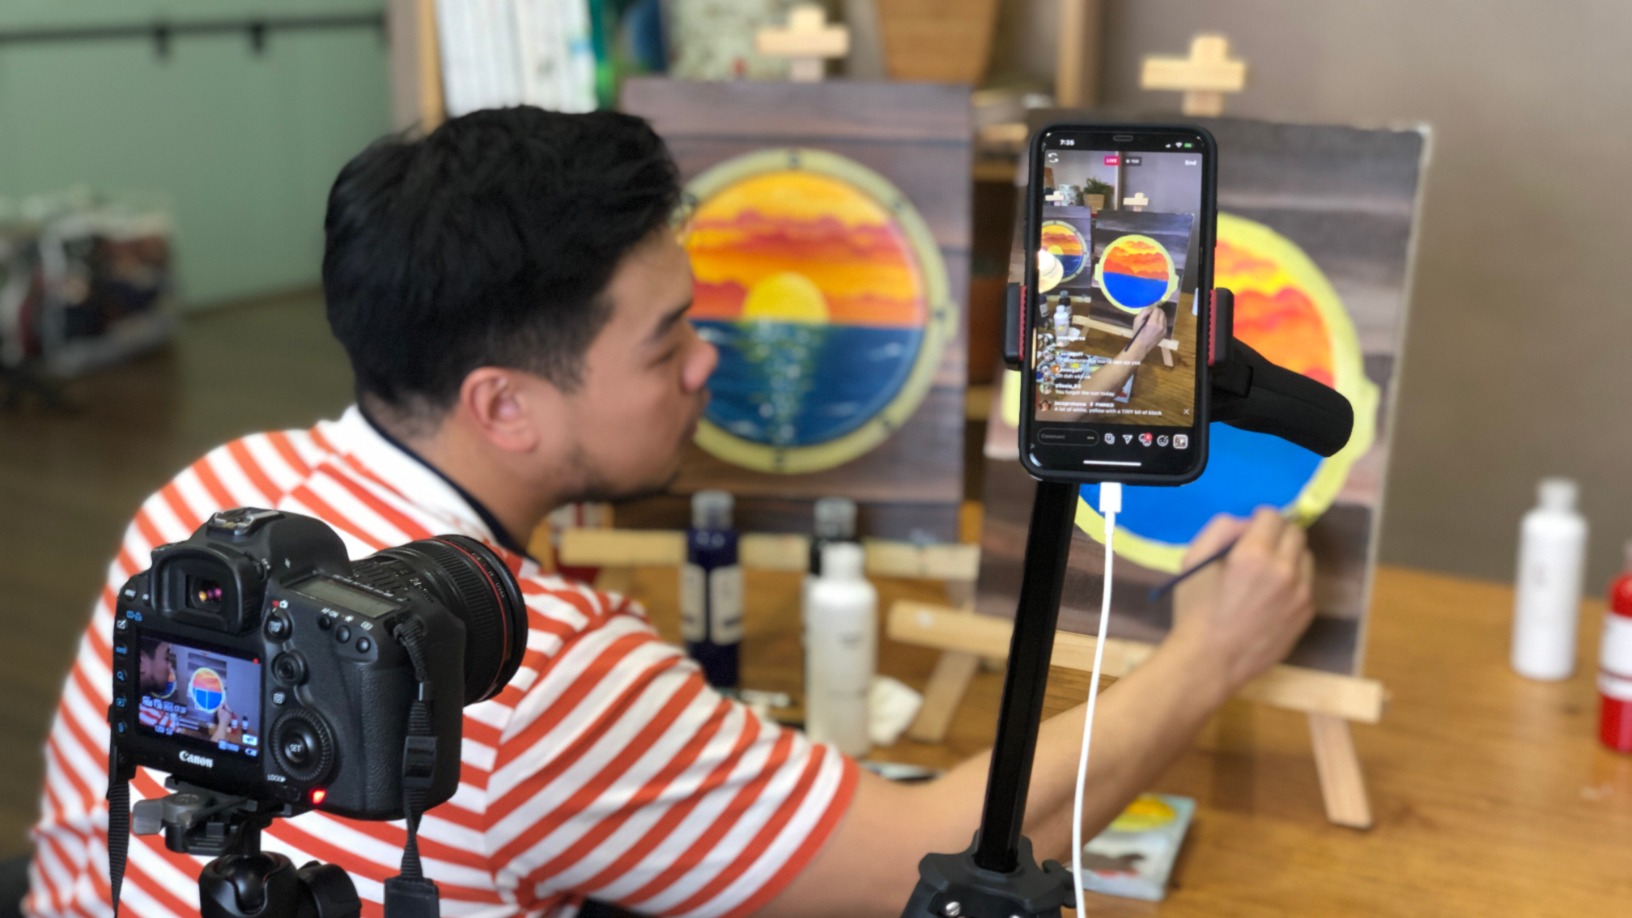 Paint-and-sip startup Bartega pivots online amid Covid-19, spreading the joy of painting to more